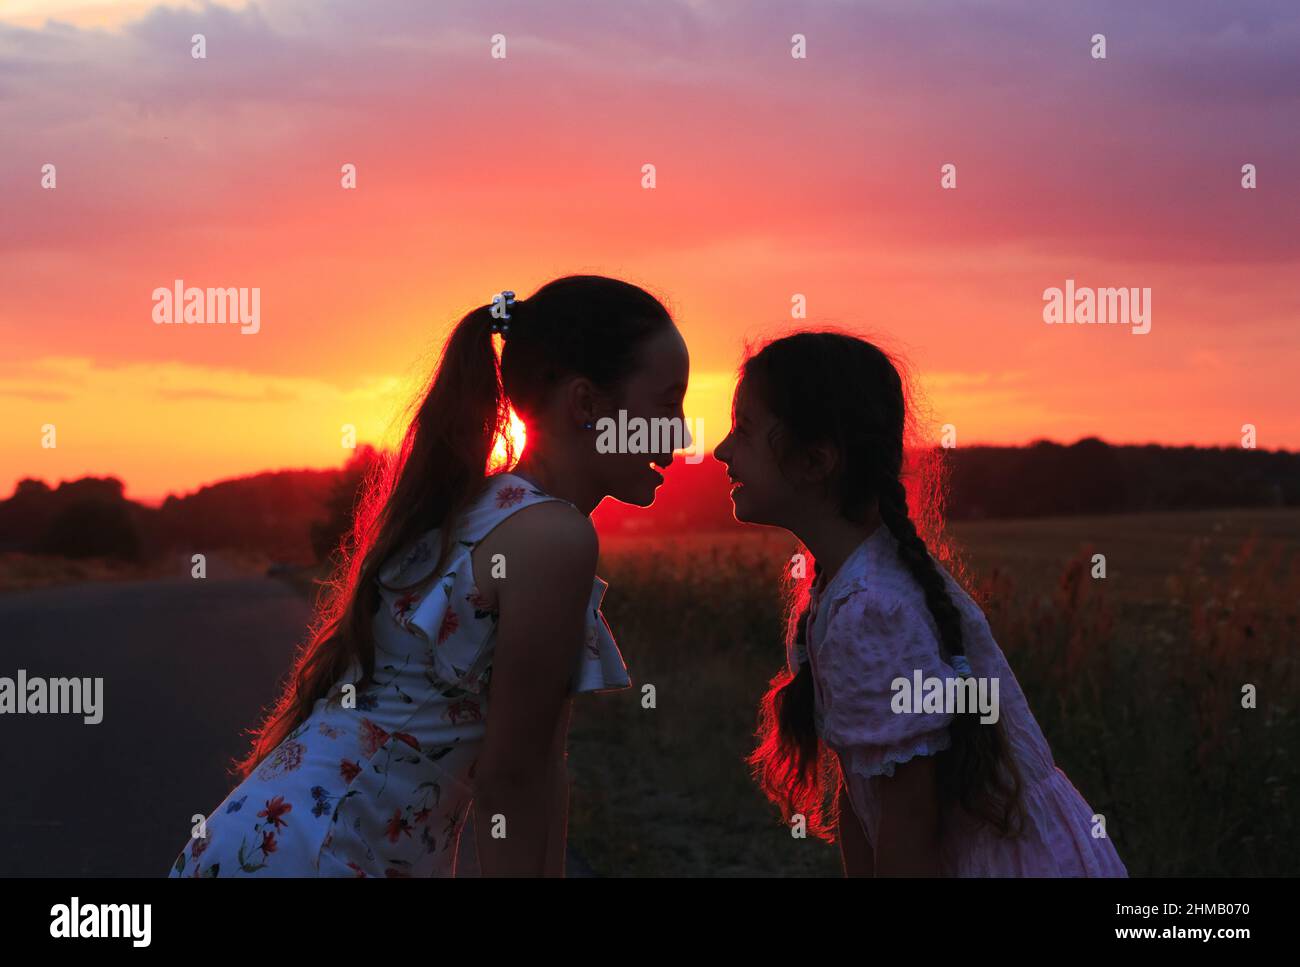 Silhouette of two little girls smiling on sunset. Sisters enjoyed a Holiday over blurred summer nature. Hhappy childhood concept. Stock Photo